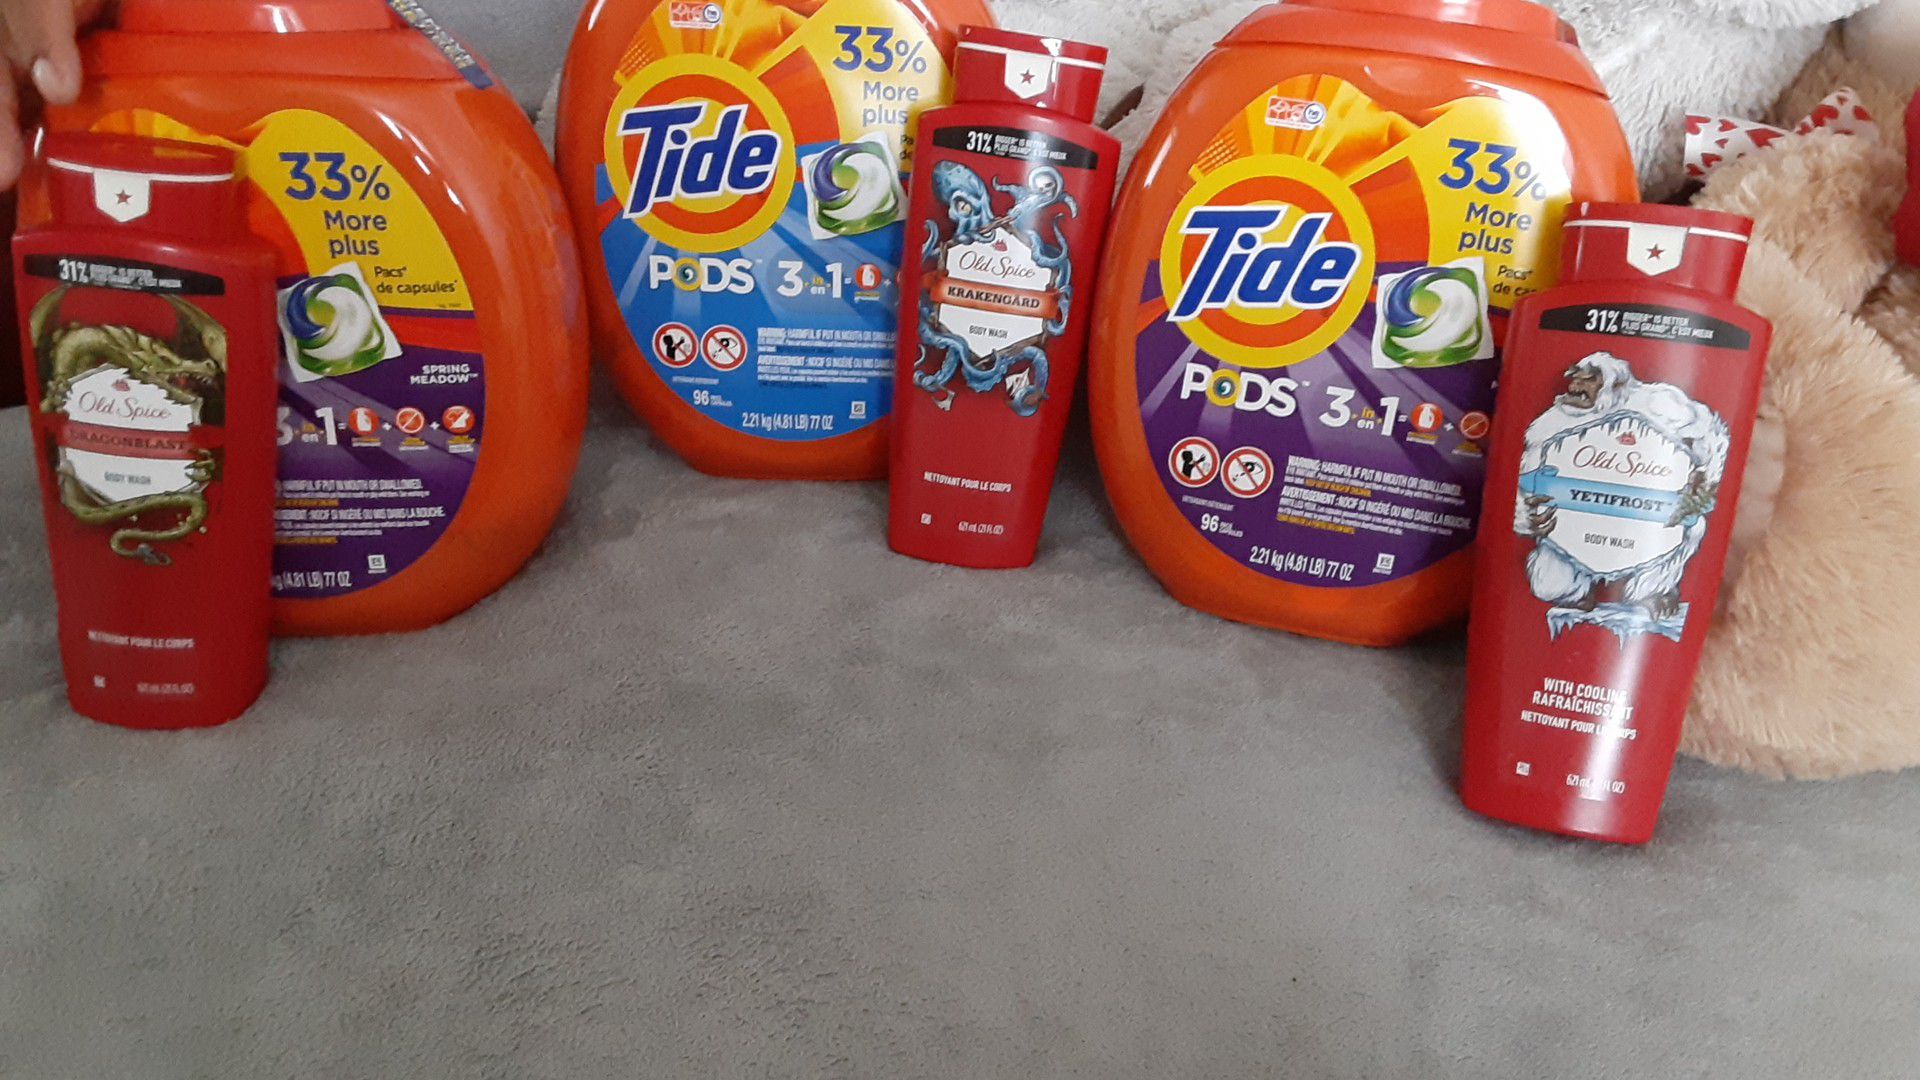 Laundry soap and Old Spice body wash